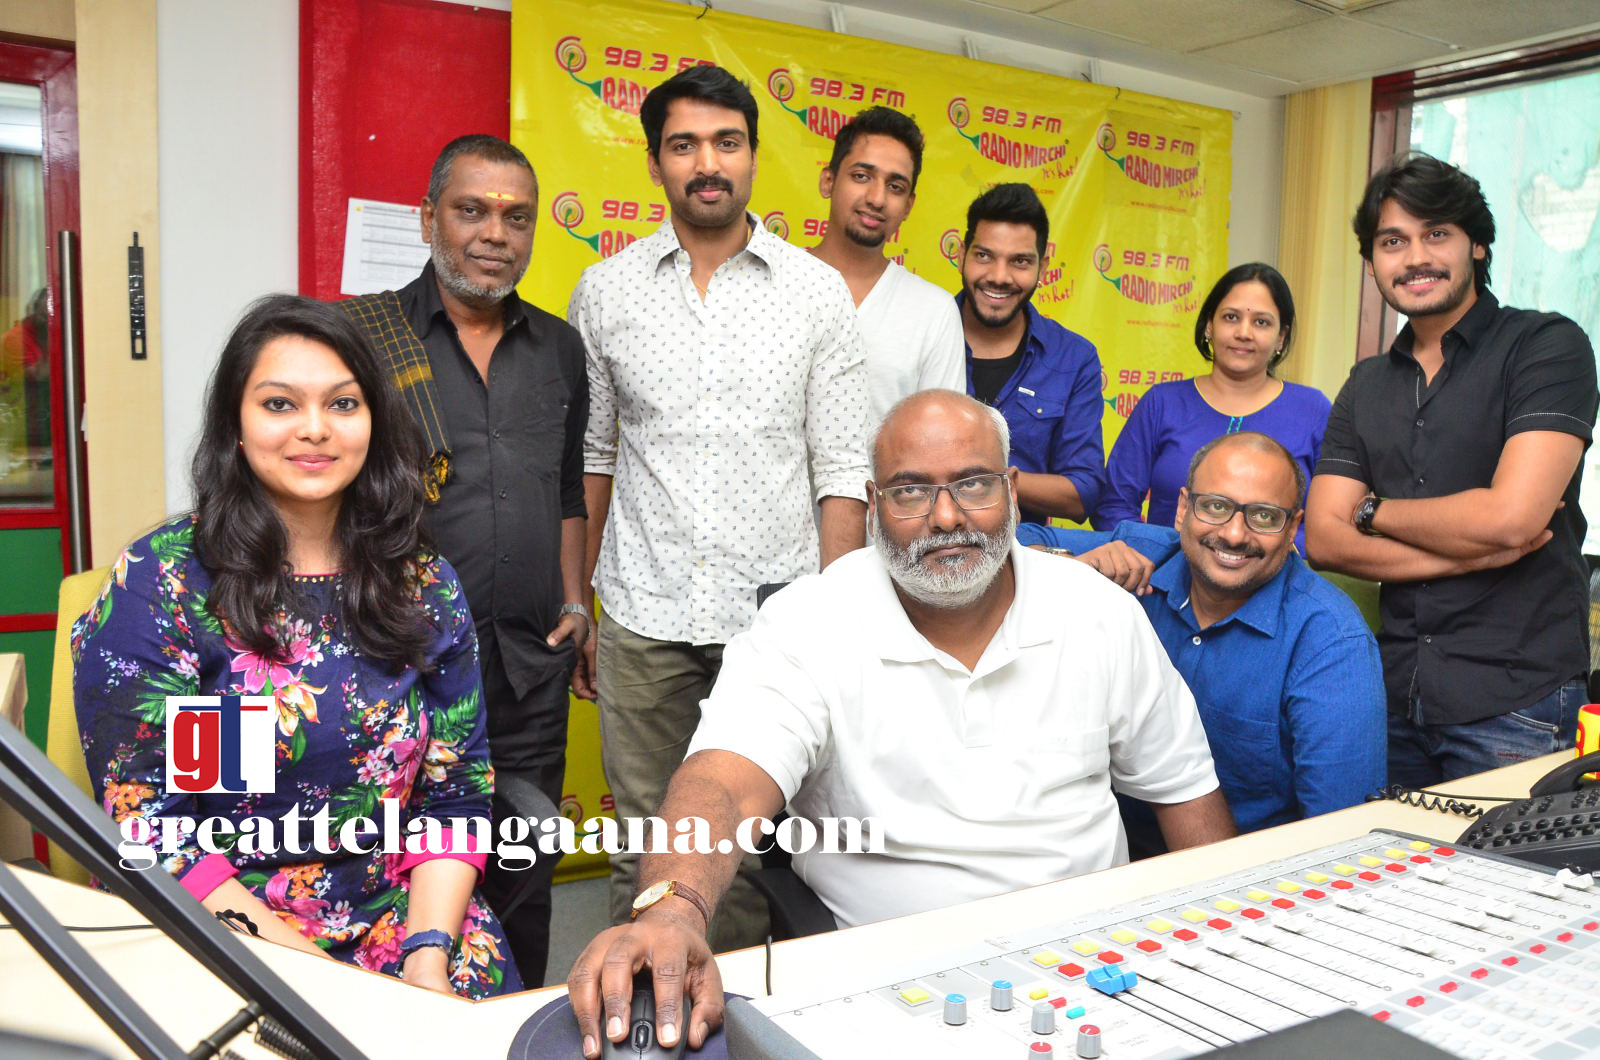 Showtime' Movie Song Launch at Radio mirchi